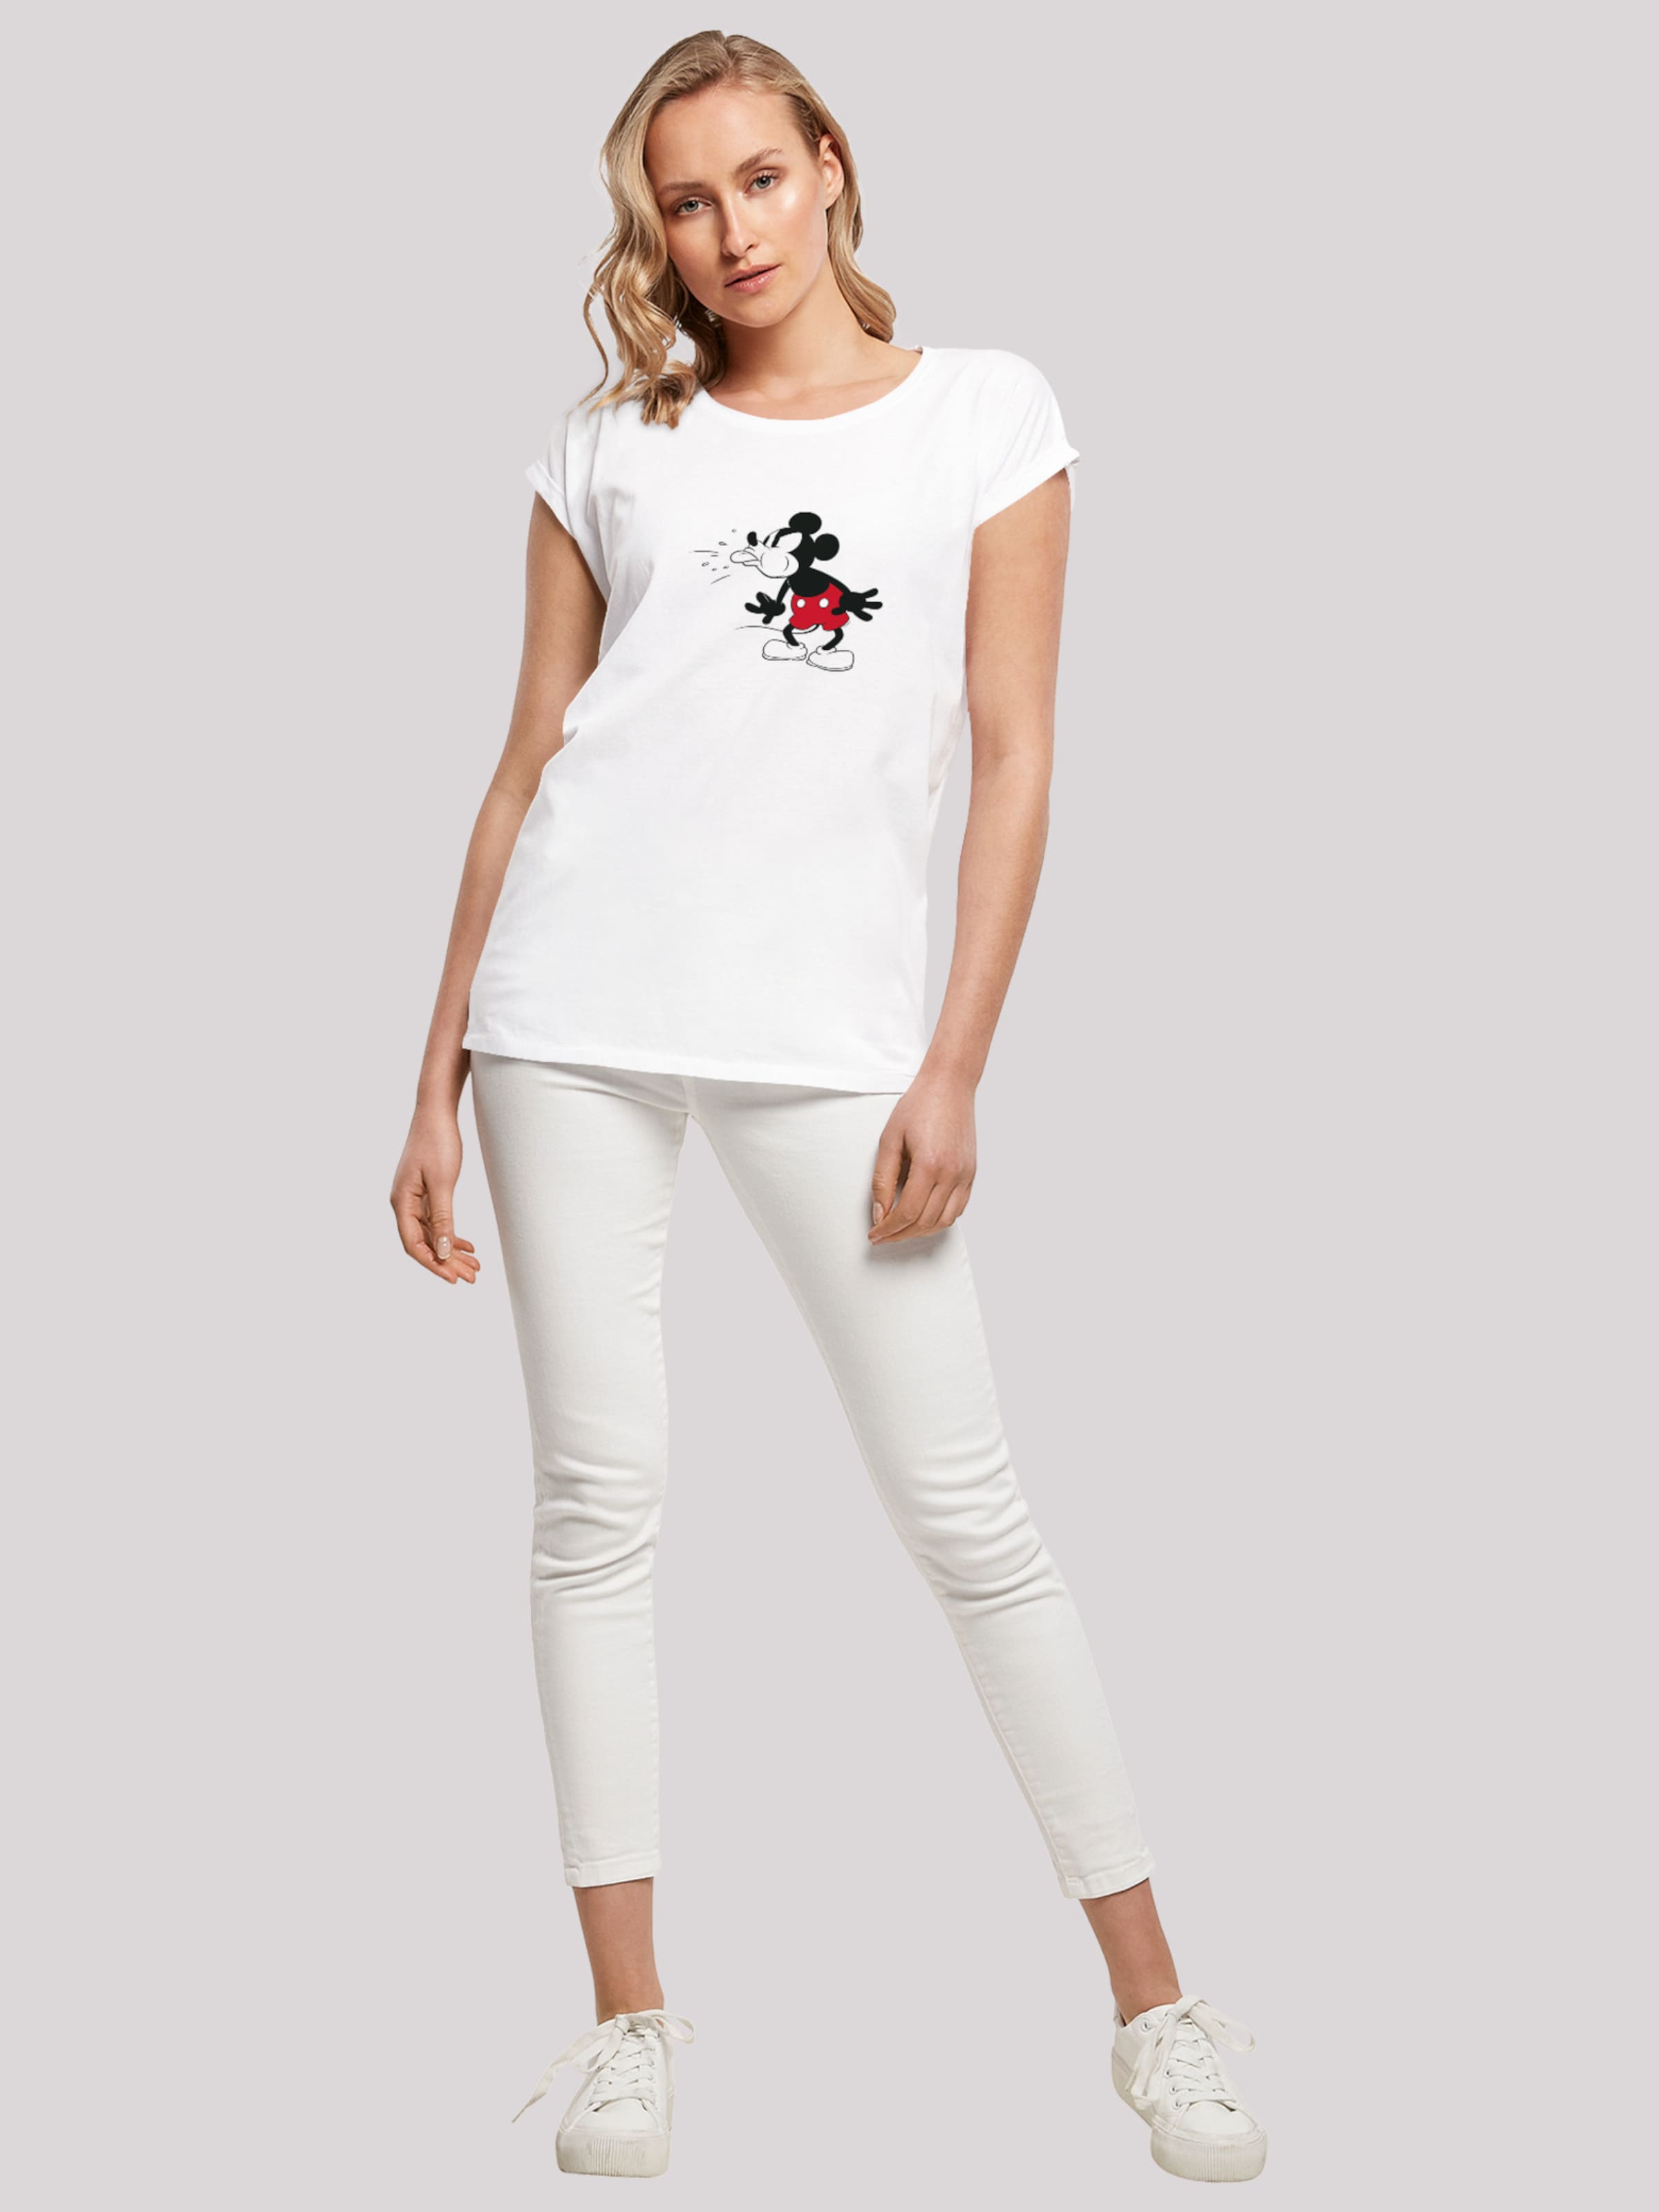 F4NT4STIC Shirt \' ABOUT White Disney YOU | Tongue\' in Mickey Mouse